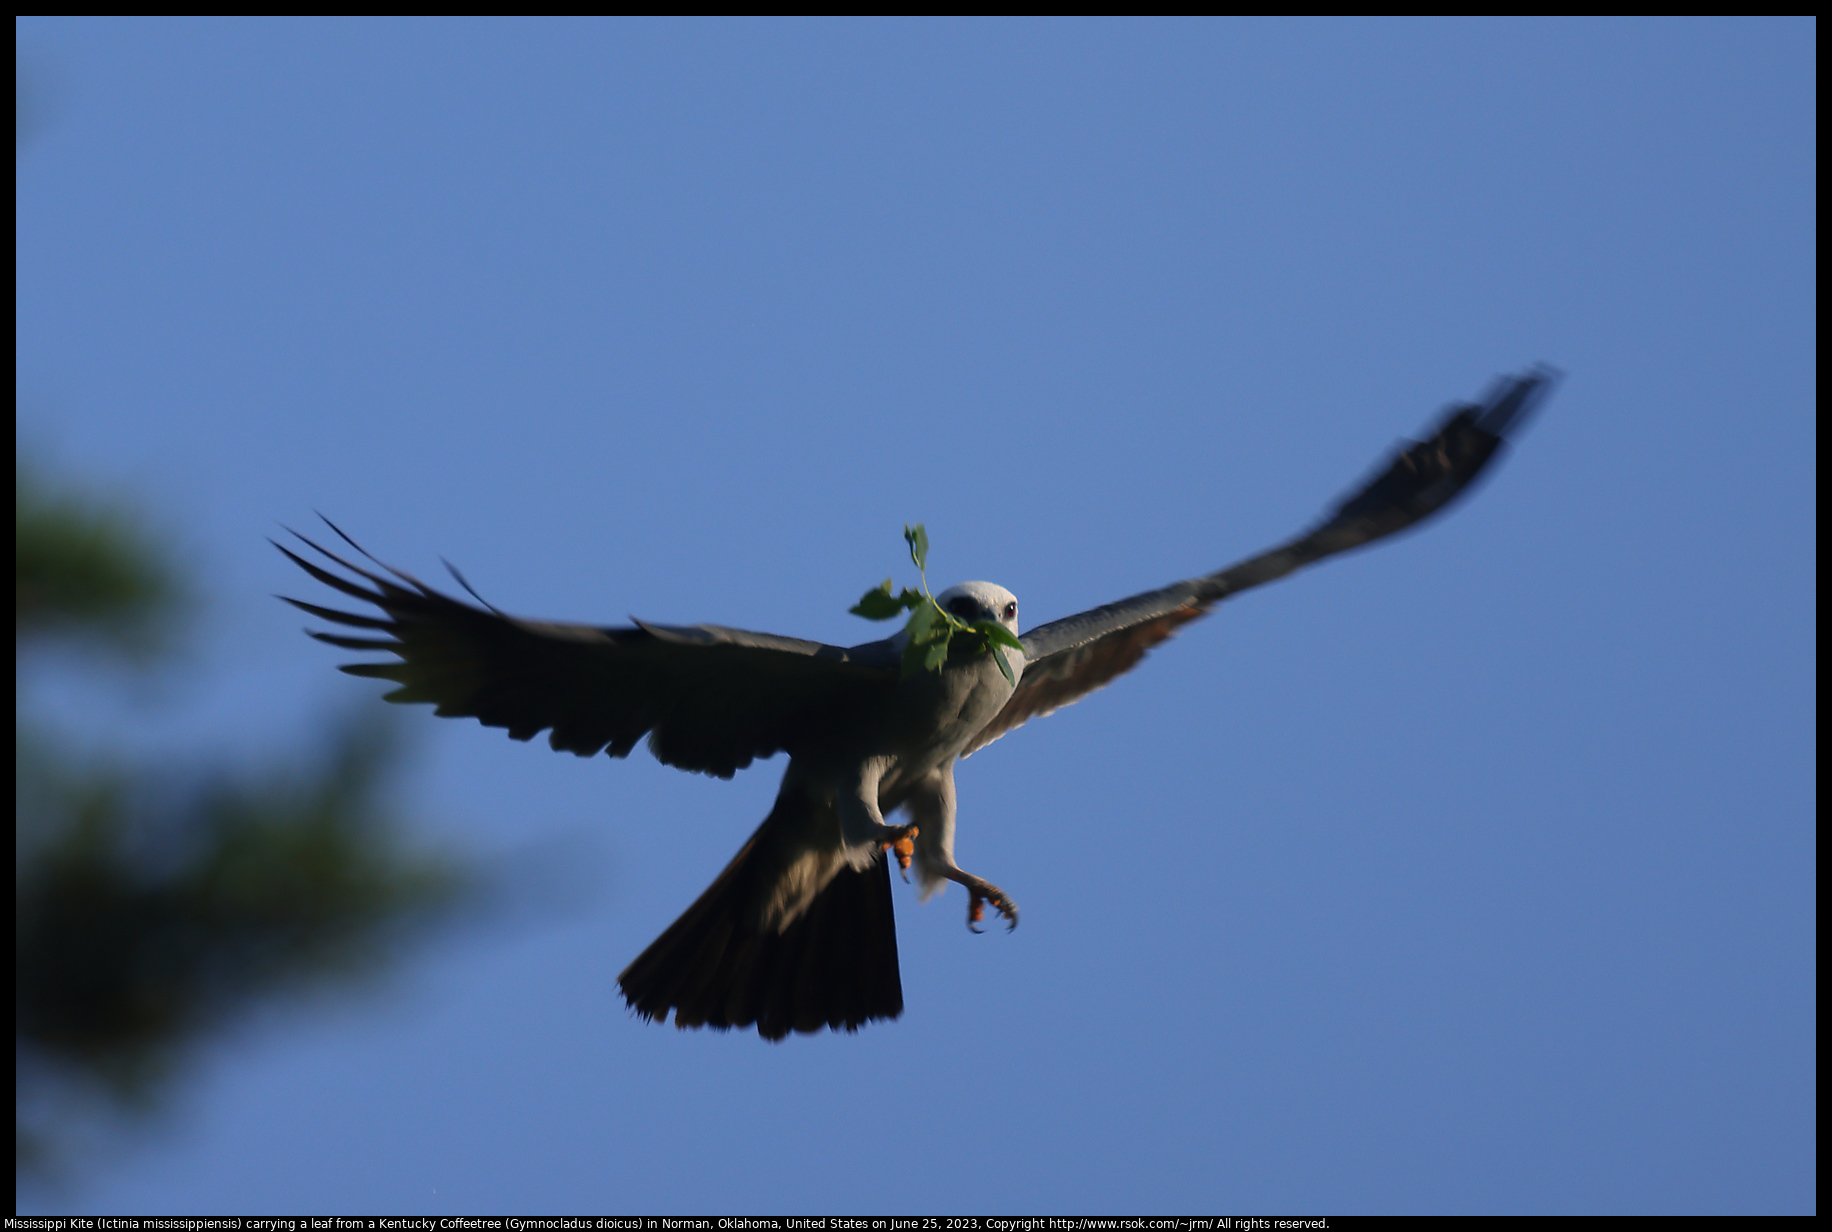 Mississippi Kite (Ictinia mississippiensis) carrying a leaf from a Kentucky Coffeetree (Gymnocladus dioicus) in Norman, Oklahoma, United States on June 25, 2023